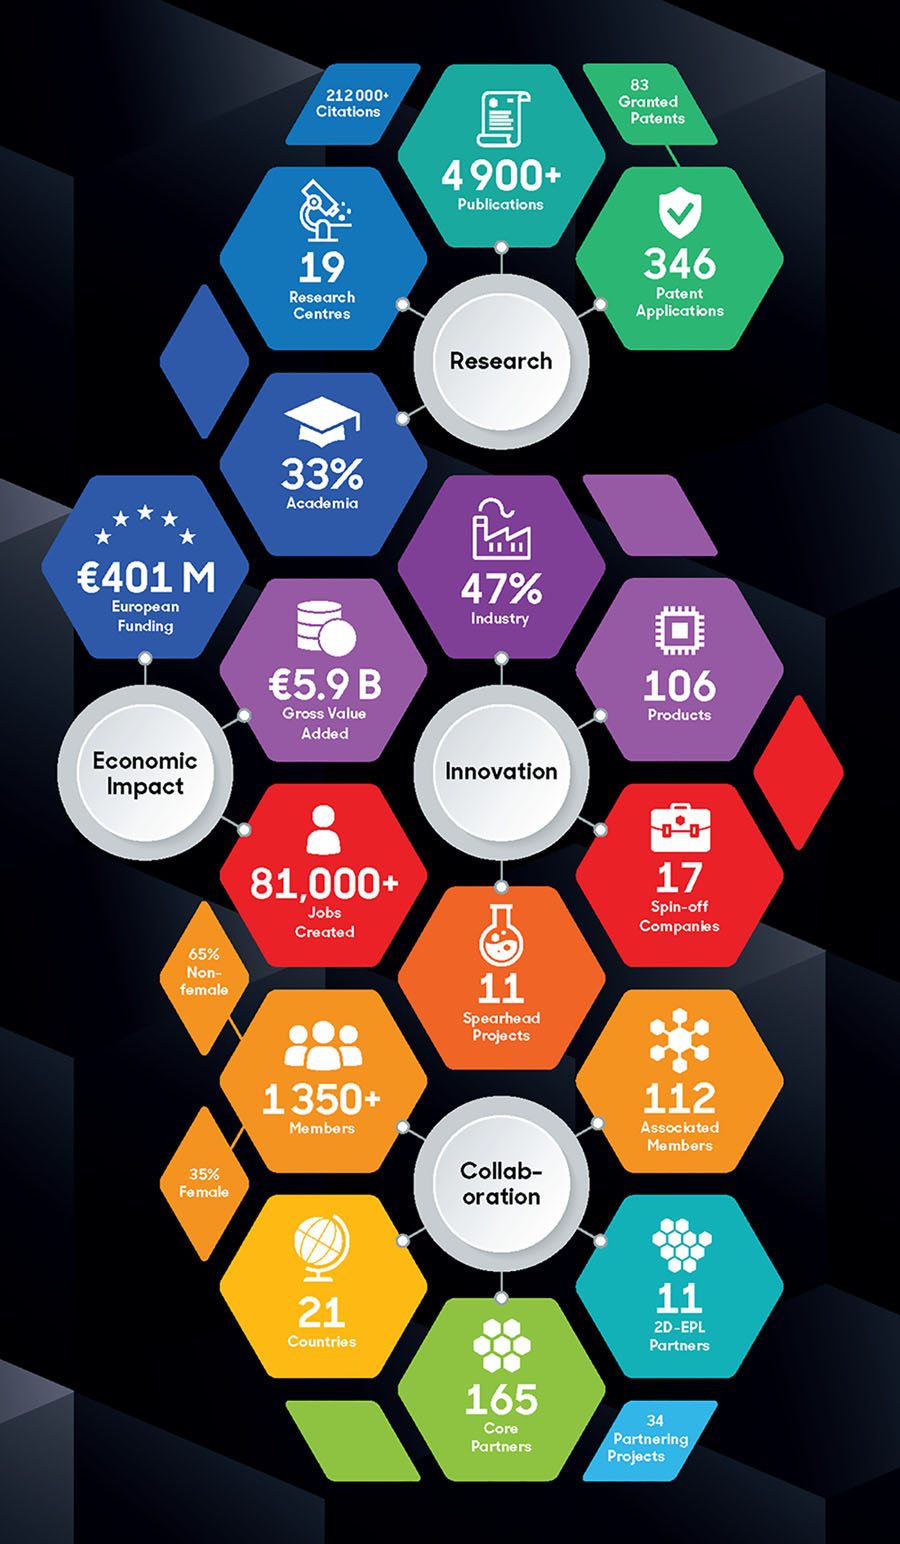 The Graphene Flagship initiative in numbers